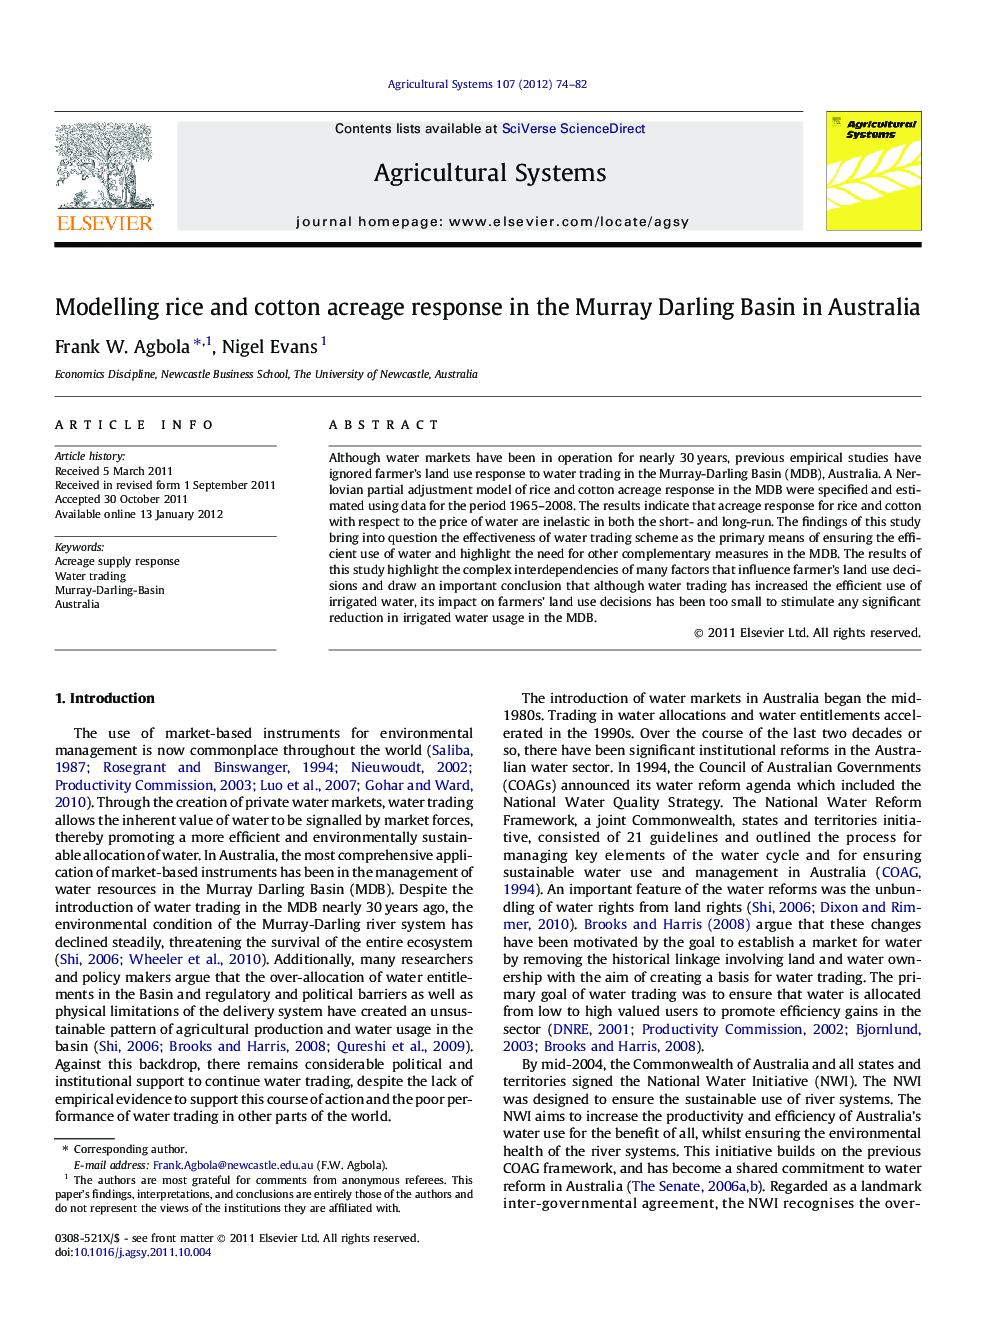 Modelling rice and cotton acreage response in the Murray Darling Basin in Australia